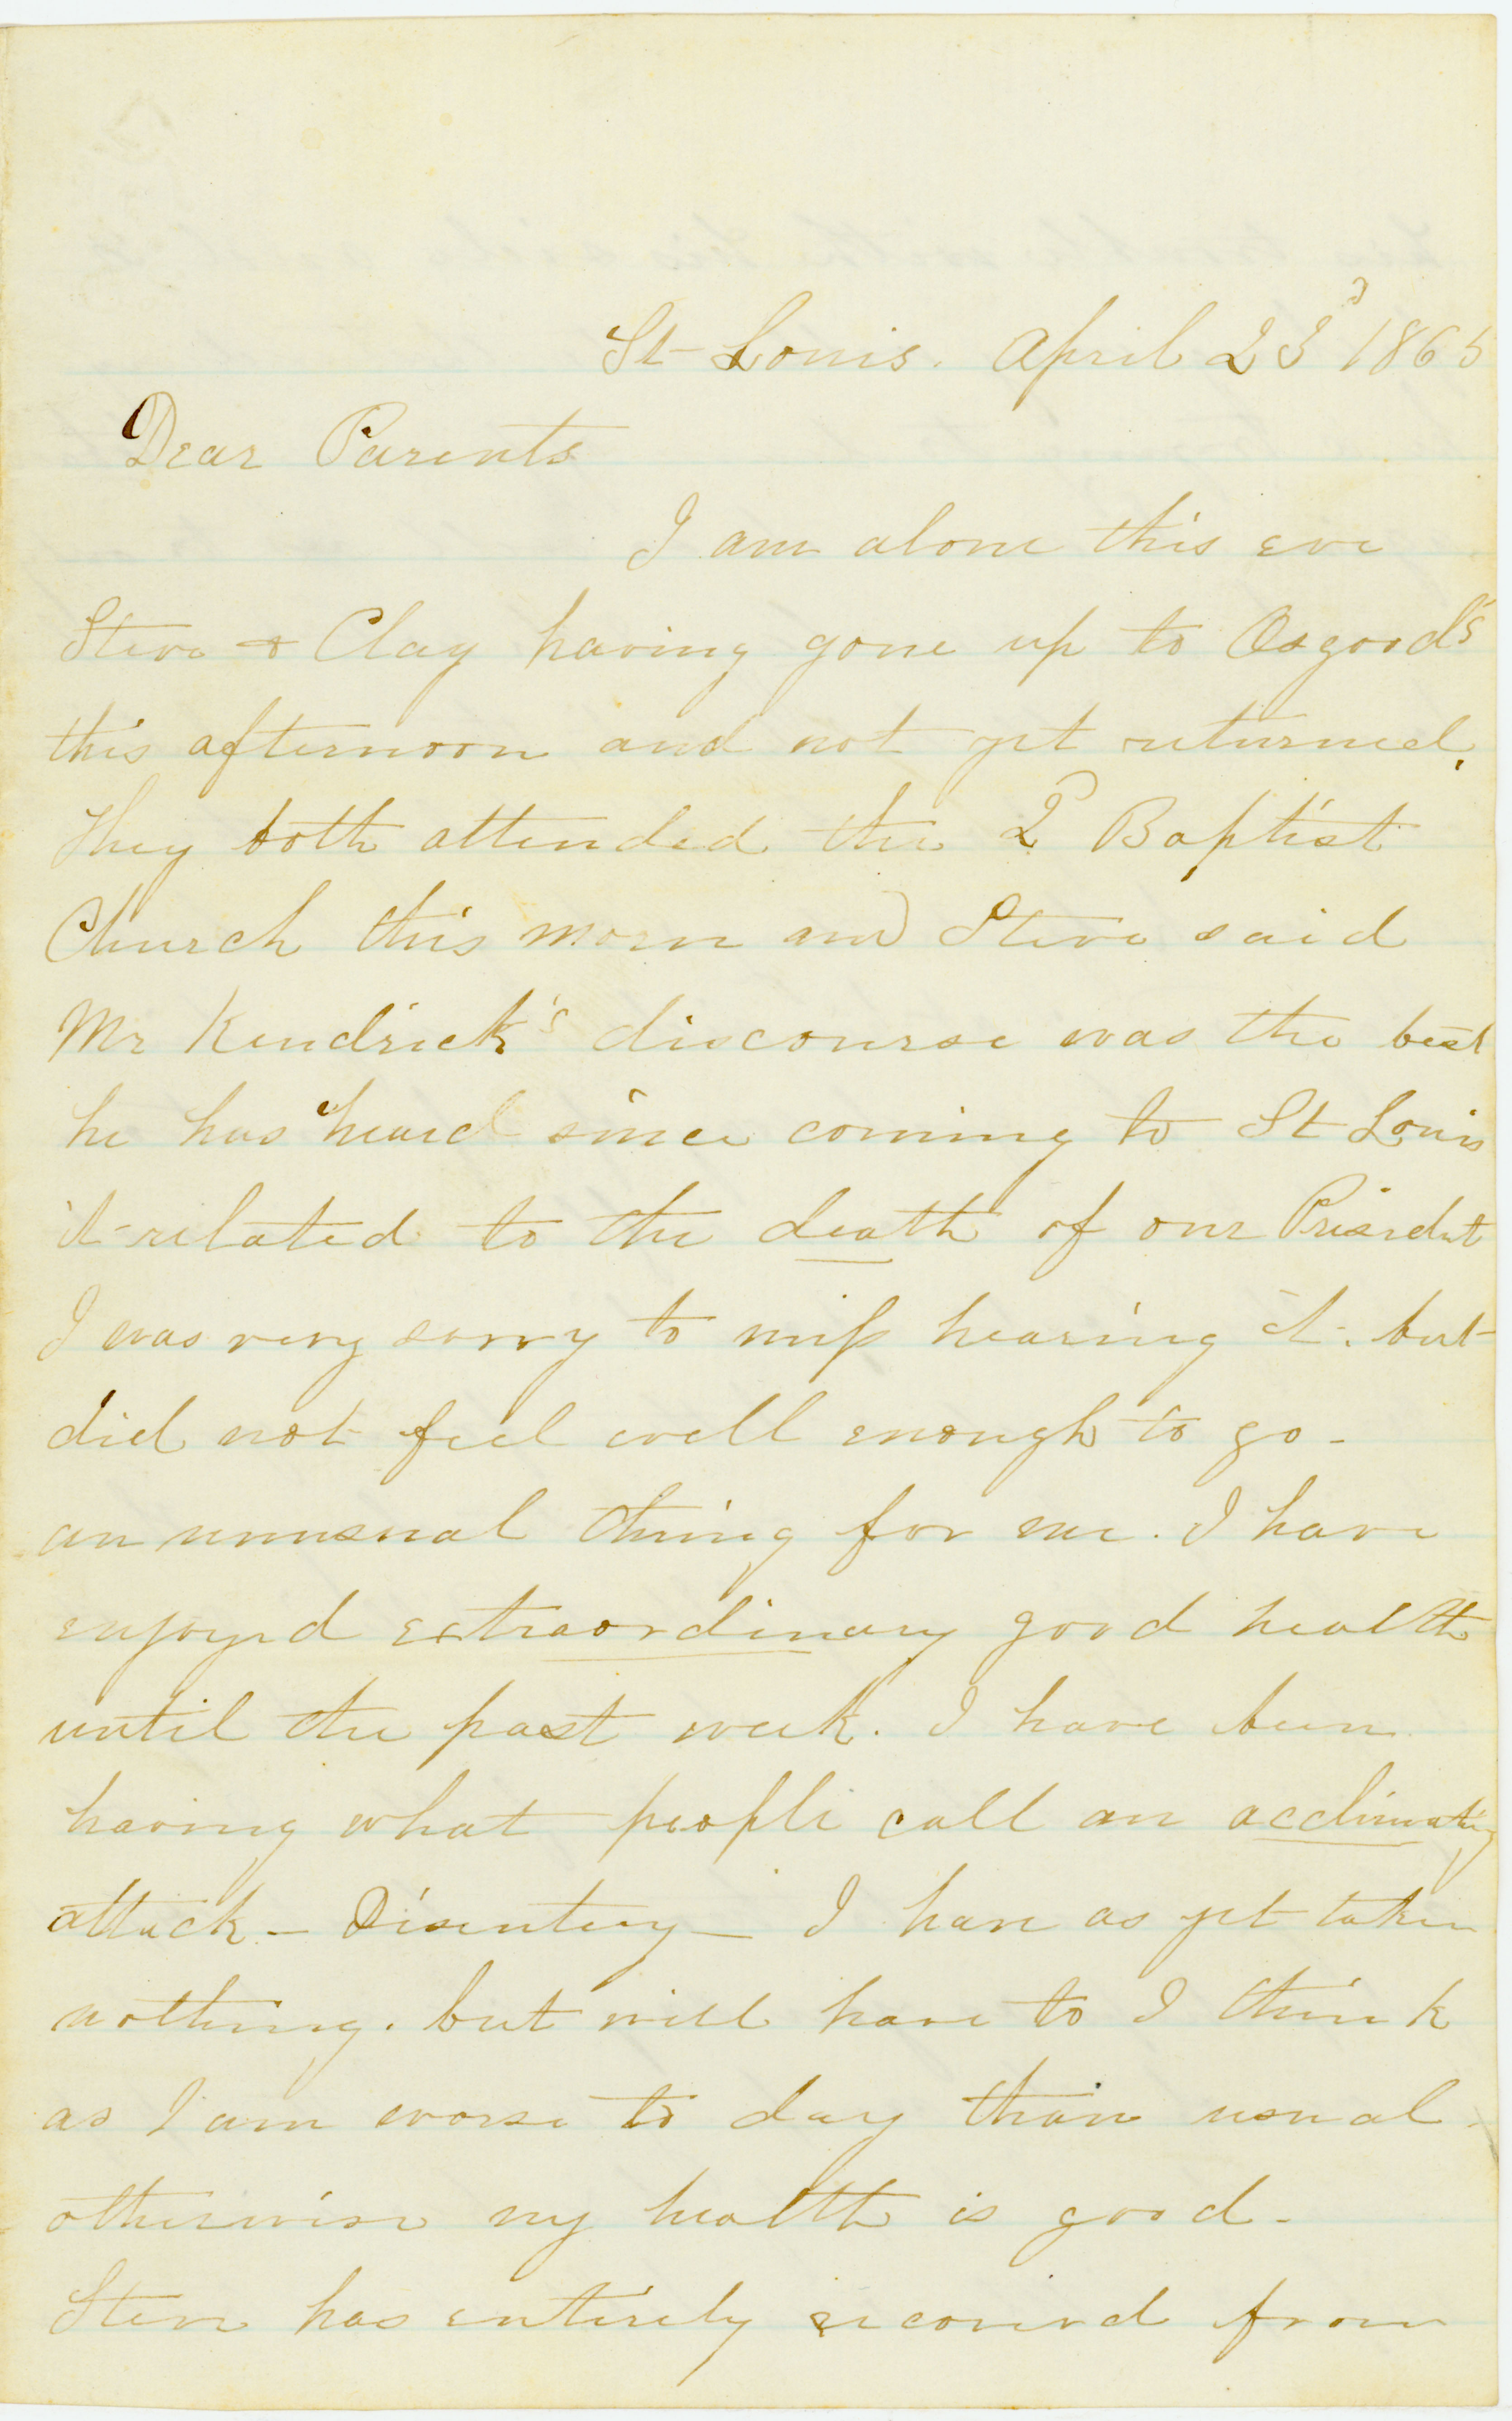 Letter signed Althea [Althea Johnson] and Clay, St. Louis, to Parents, April 23, 1865